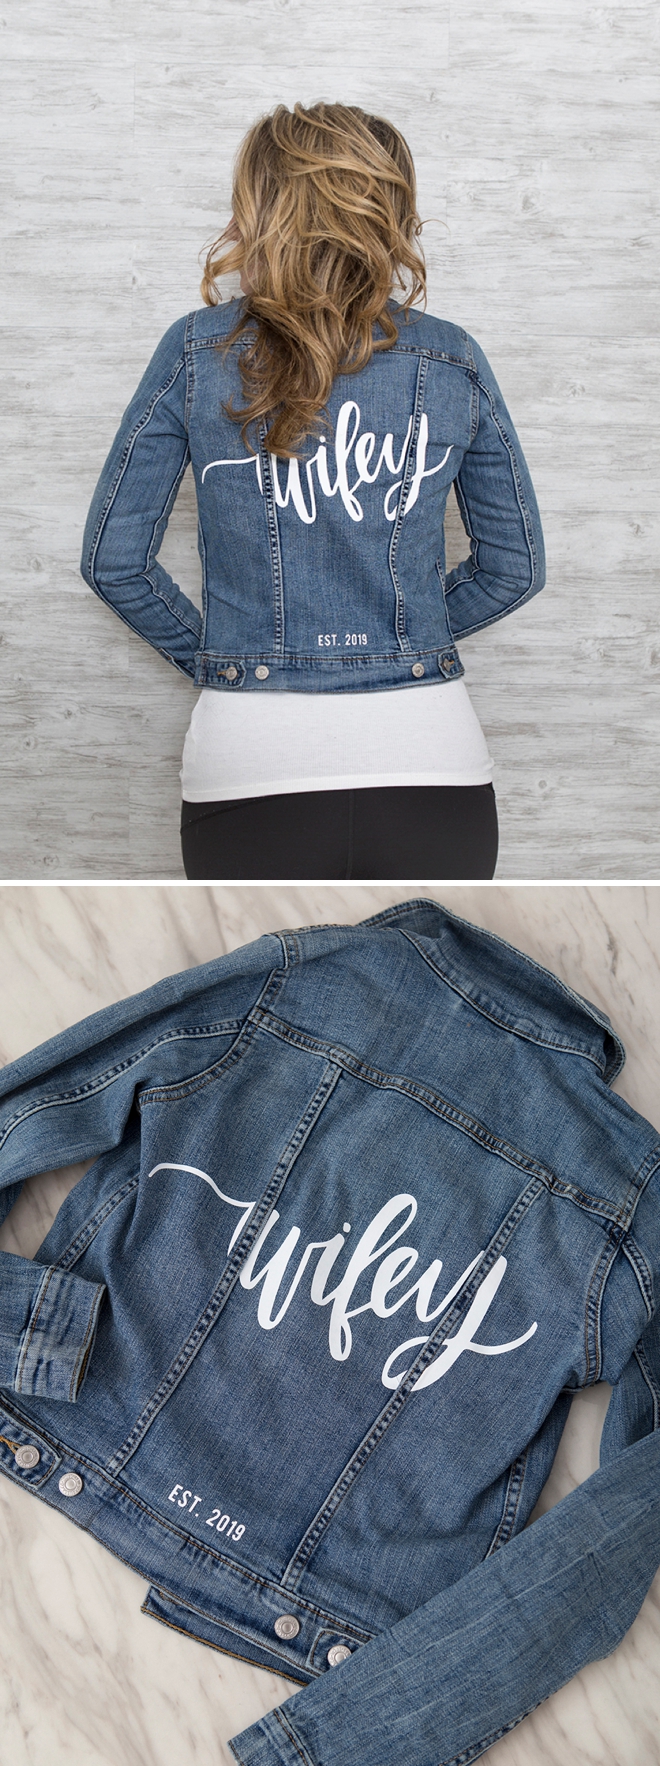 Use your Cricut to personalize these gorgeous wedding jean jackets!